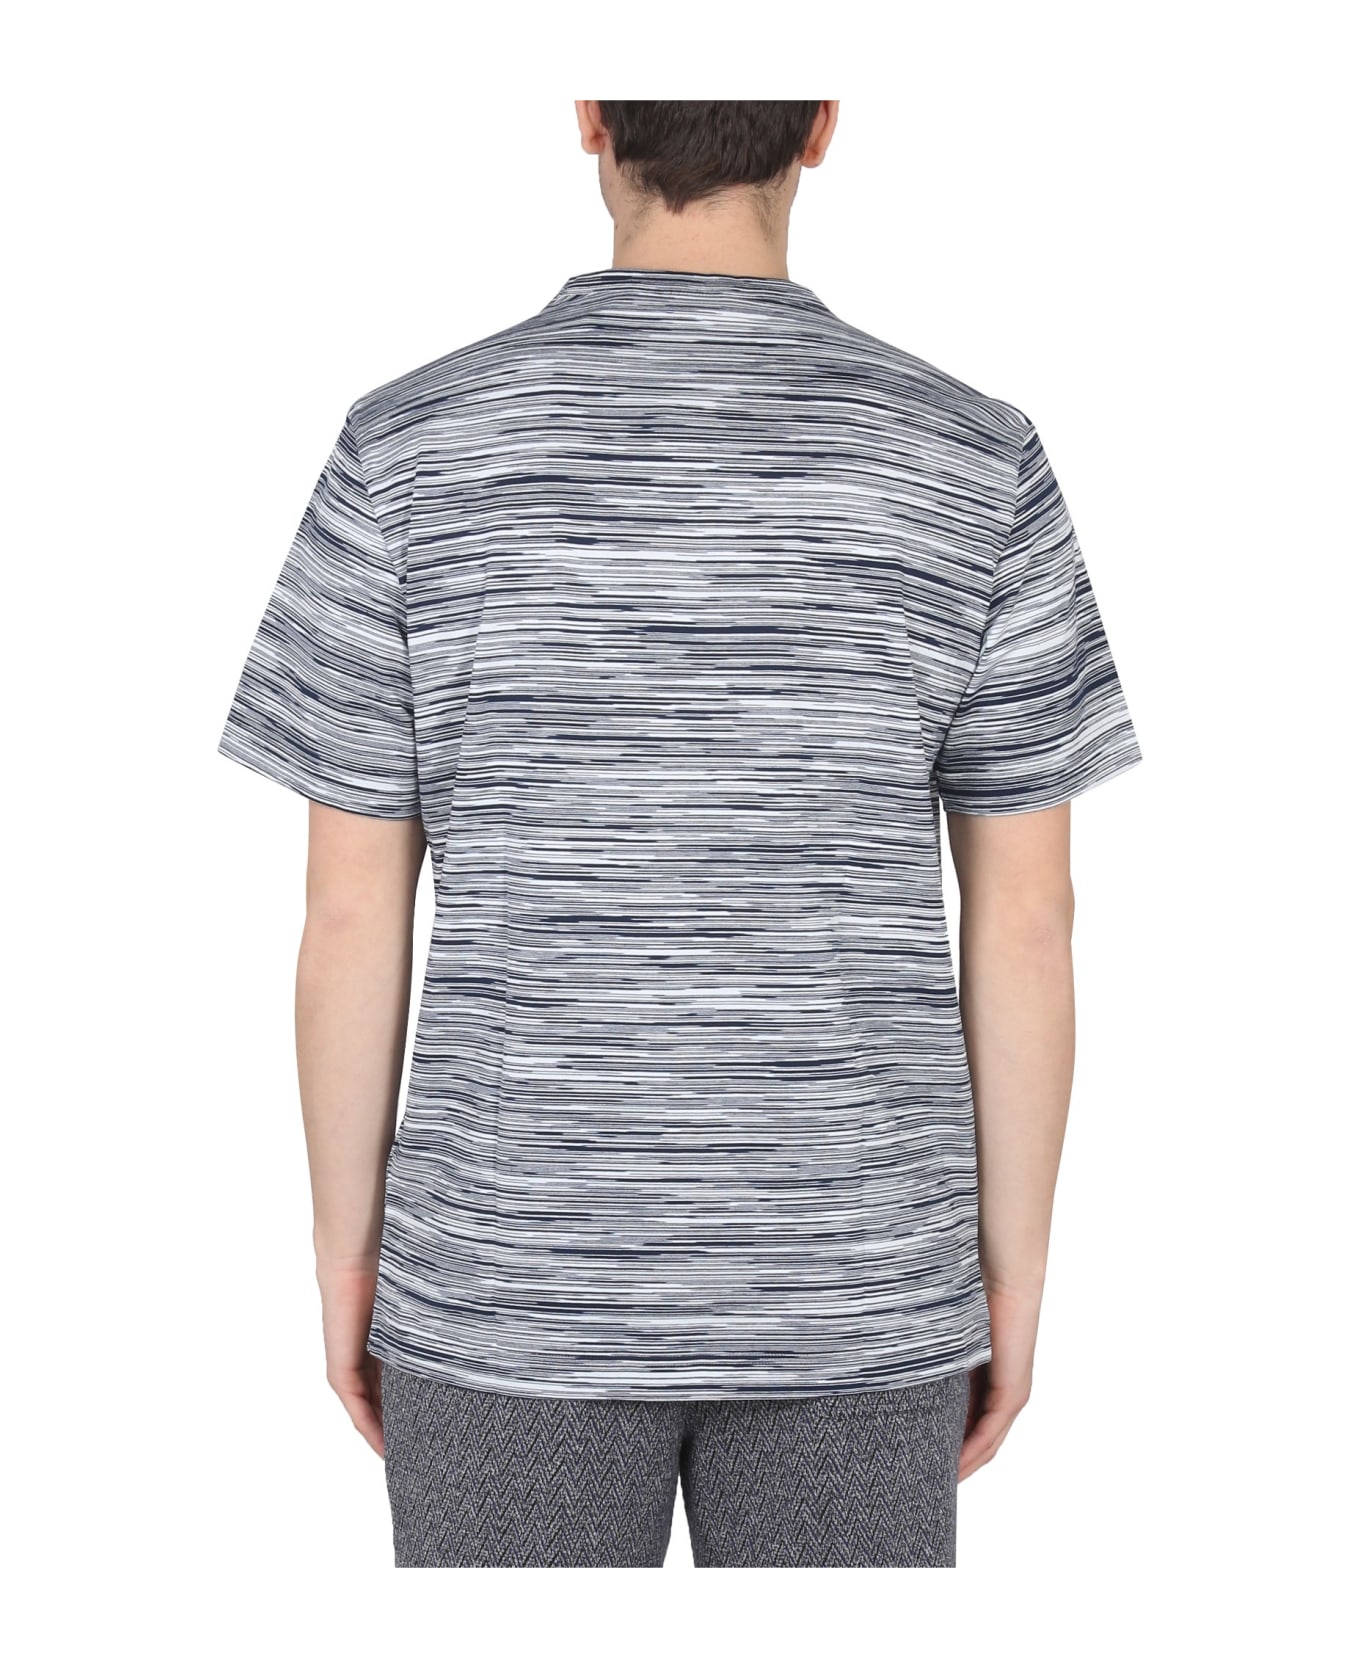 Missoni Space Dyed T-shirt - F703I シャツ